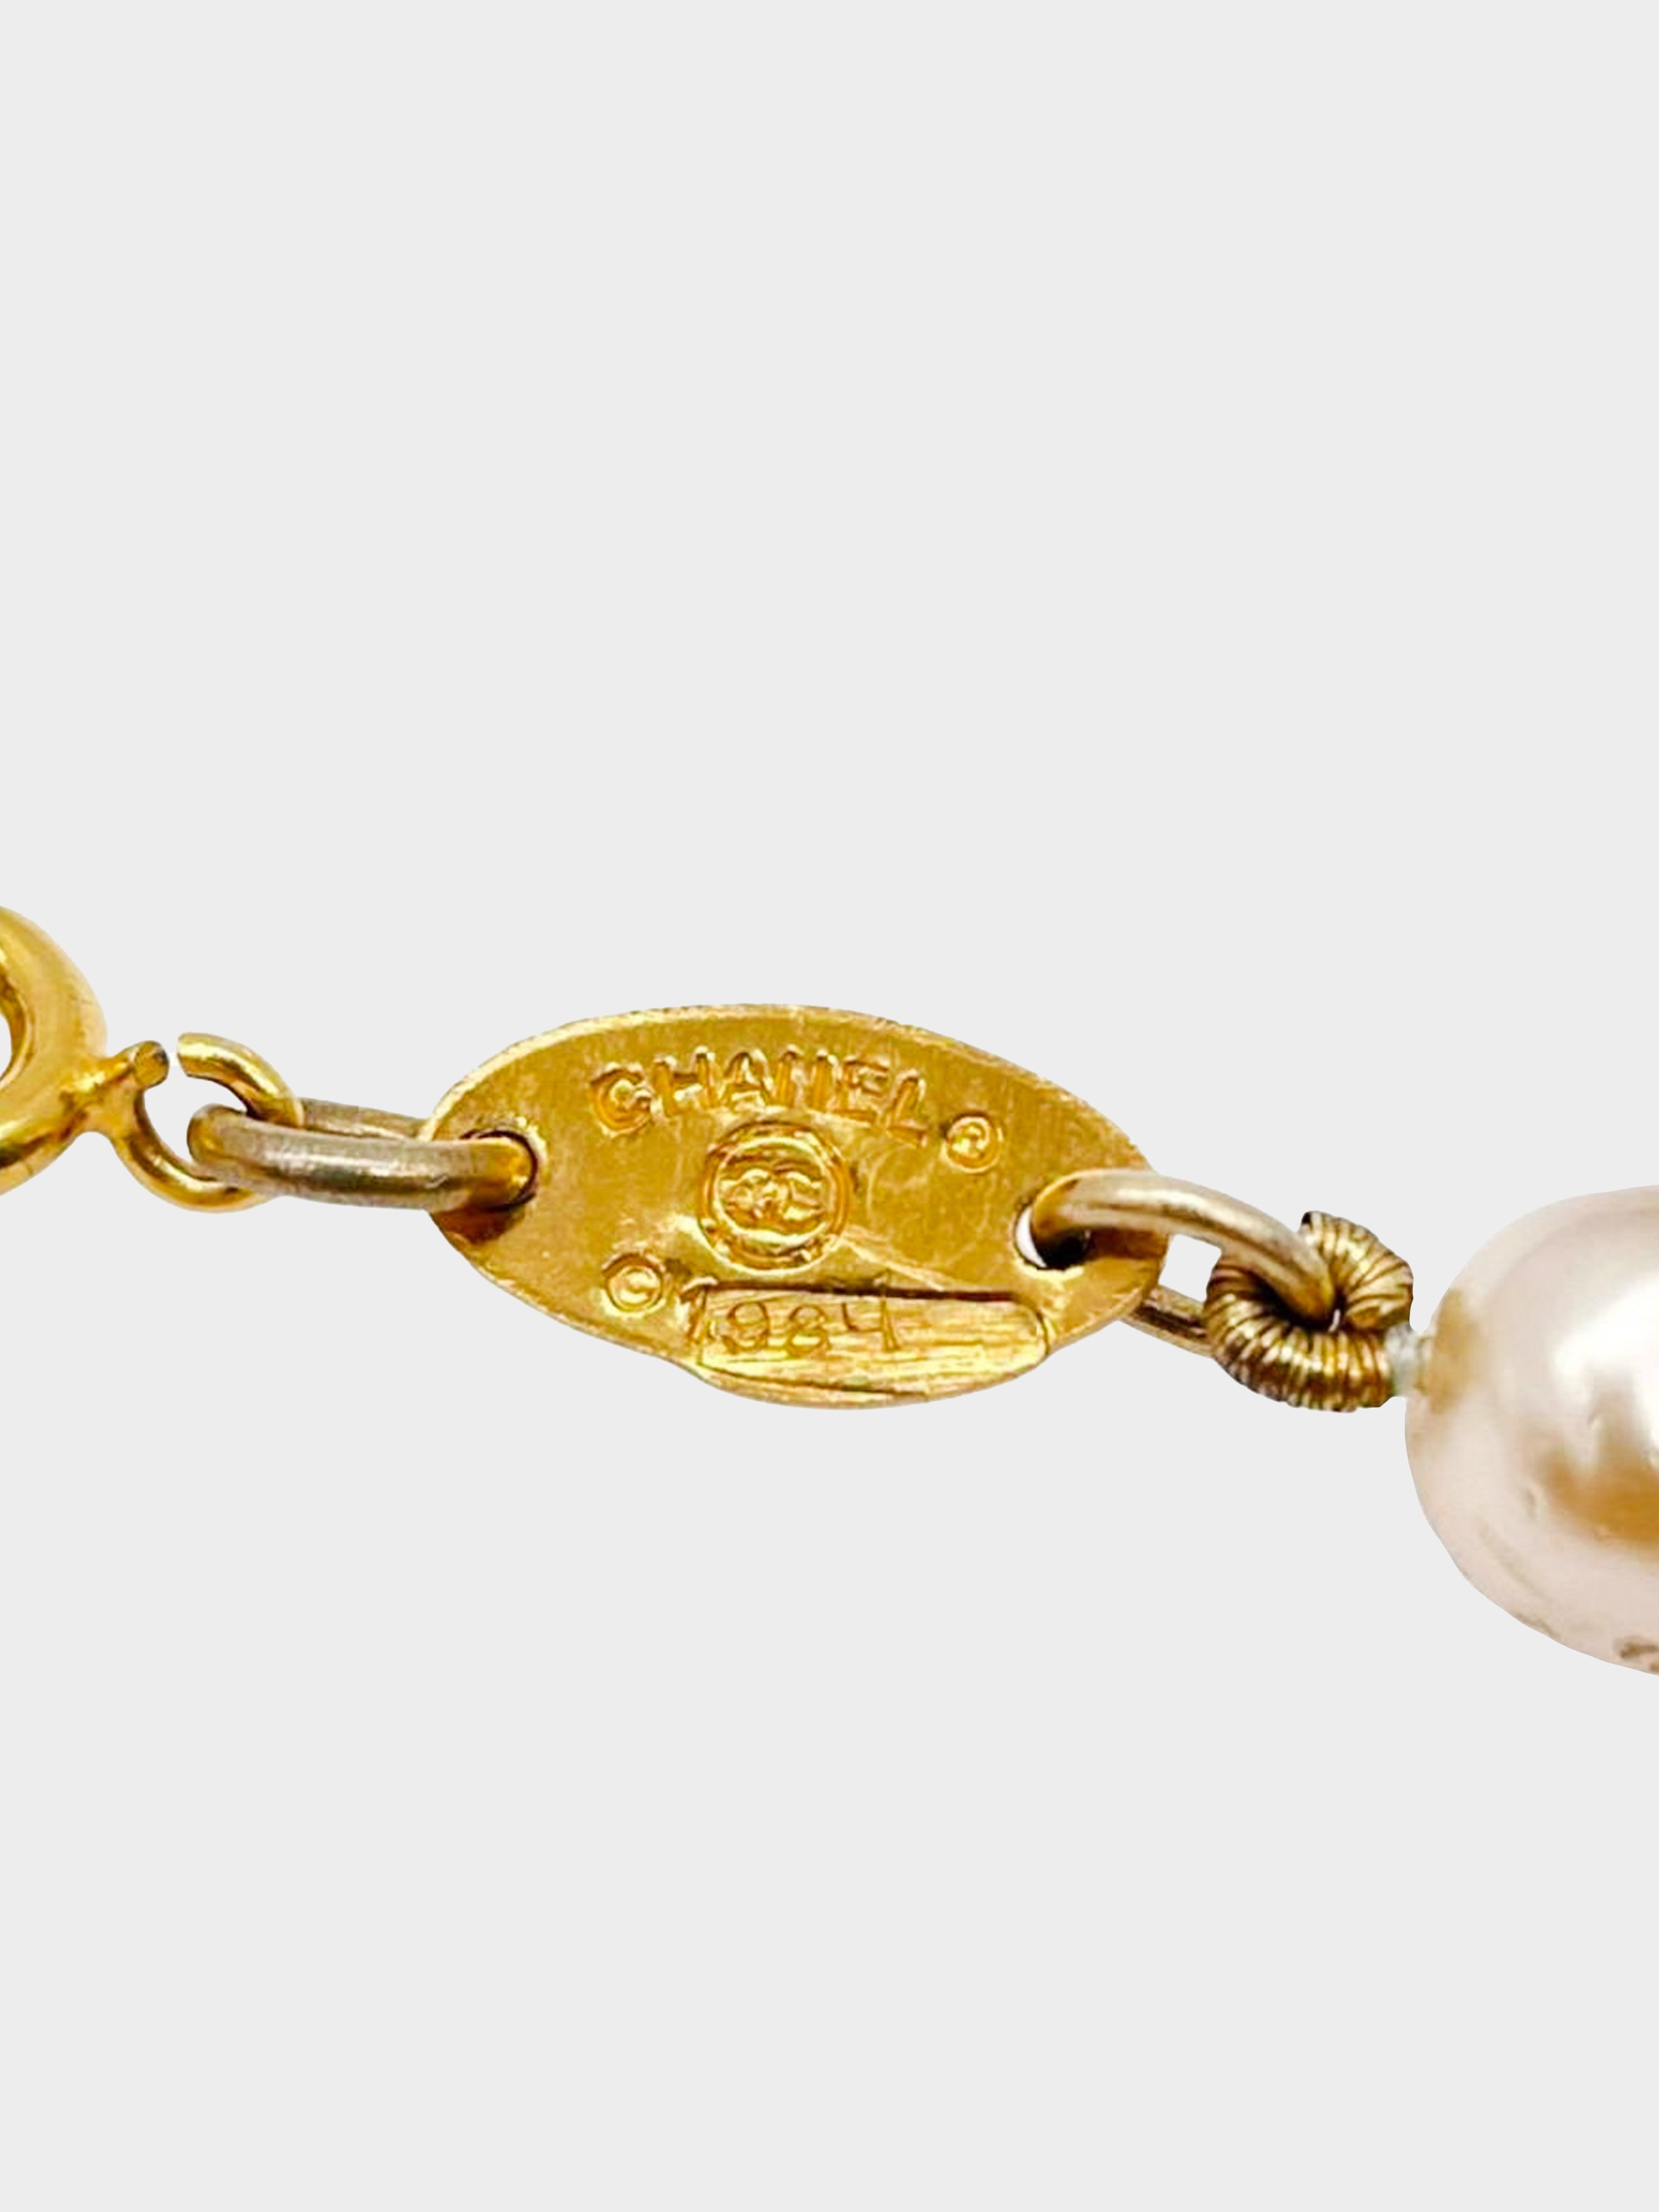 Chanel 1984 Double Pearl Necklace · INTO